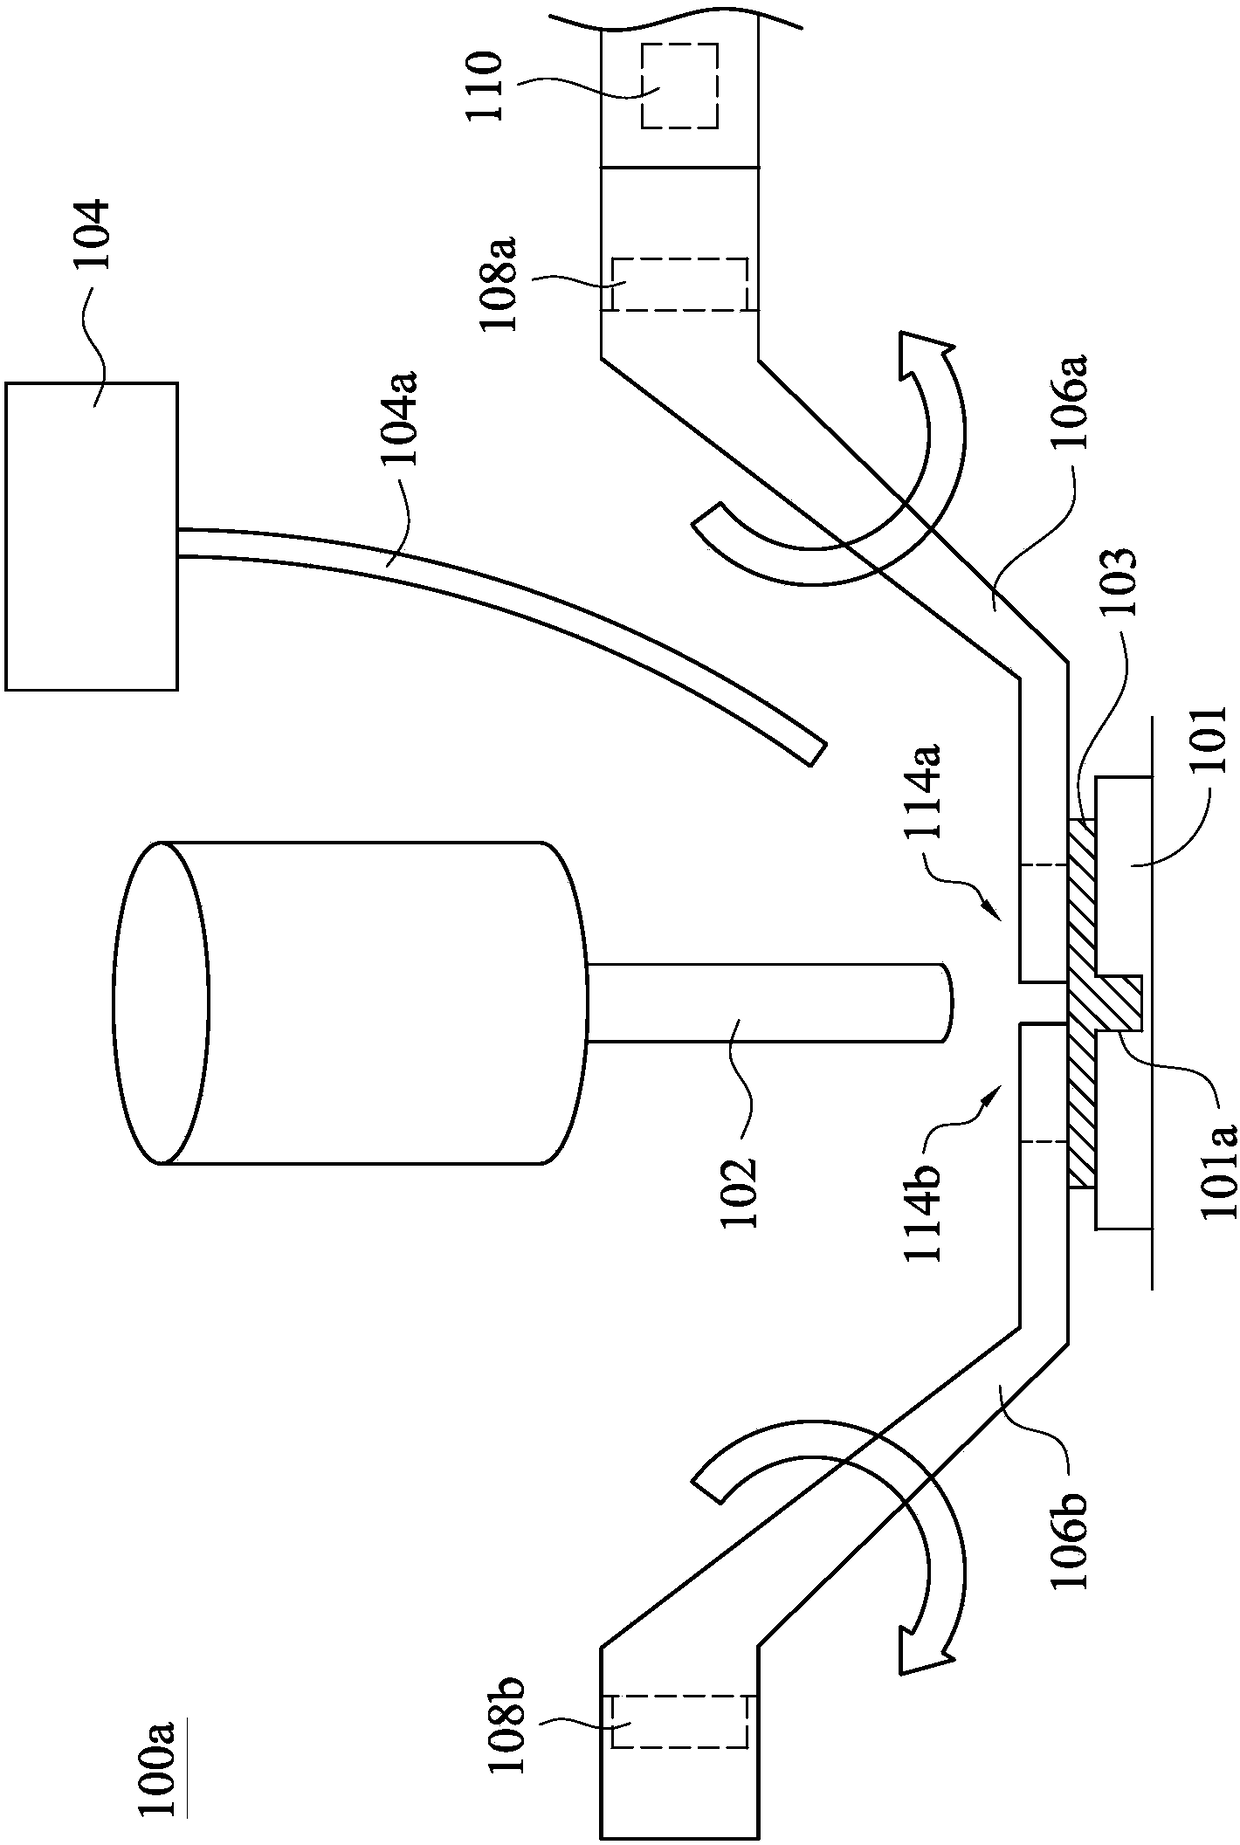 Apparatus for ultrasonic-assisted machining